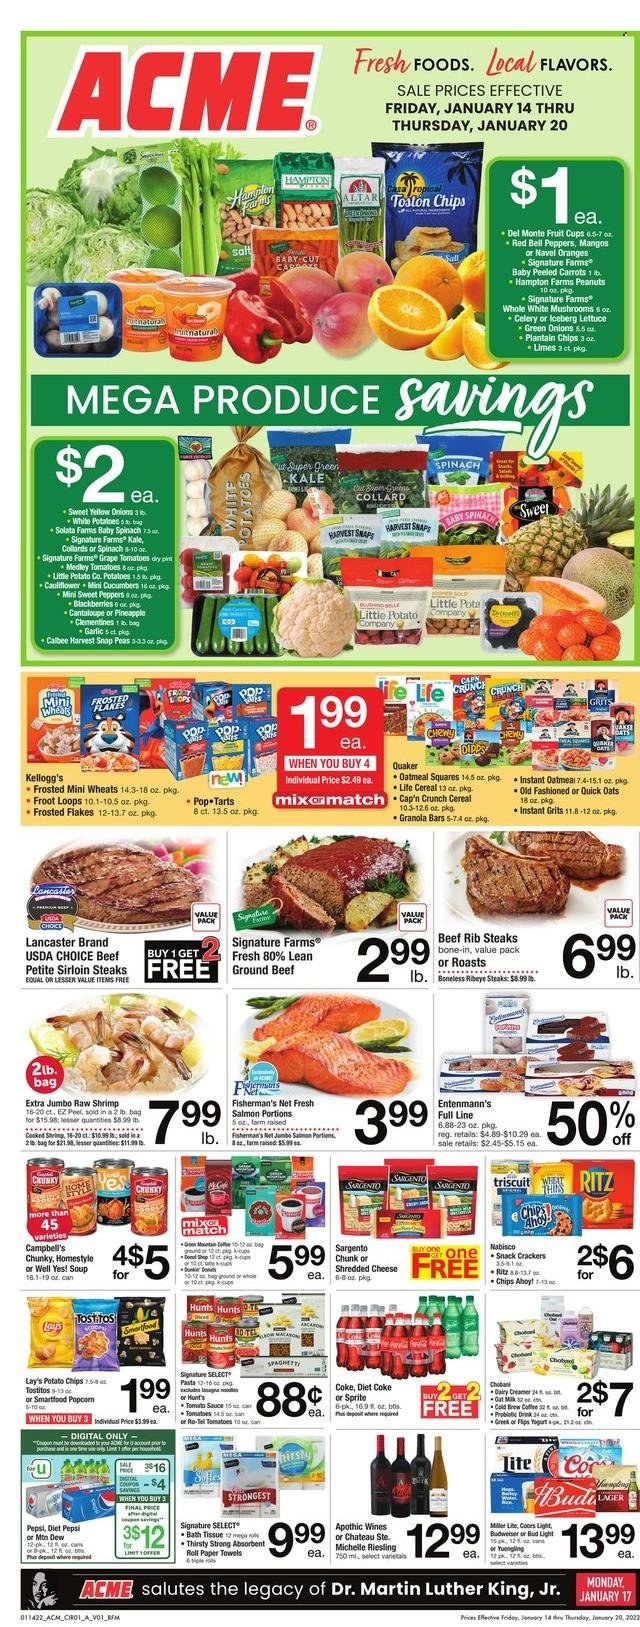 thumbnail - ACME Flyer - 01/14/2022 - 01/20/2022 - Sales products - mushrooms, fruit cup, Entenmann's, cantaloupe, cucumber, garlic, spinach, sweet peppers, tomatoes, kale, peas, lettuce, green onion, limes, mango, oranges, salmon, shrimps, Campbell's, soup, pasta, sauce, Quaker, noodles, shredded cheese, Sargento, Chobani, creamer, snap peas, snack, crackers, Kellogg's, Pop-Tarts, RITZ, potato chips, chips, Lay’s, Smartfood, Thins, Tostitos, oatmeal, oats, grits, salt, Harvest Snaps, tomato sauce, cereals, granola bar, Cap'n Crunch, Quick Oats, Frosted Flakes, peanuts, Coca-Cola, Mountain Dew, Sprite, Pepsi, Diet Pepsi, Diet Coke, Riesling, white wine, beer, Bud Light, Lager, beef meat, ground beef, steak, sirloin steak, ribeye steak, bath tissue, paper, mixer, Budweiser, clementines, Coors, Yuengling, navel oranges. Page 1.